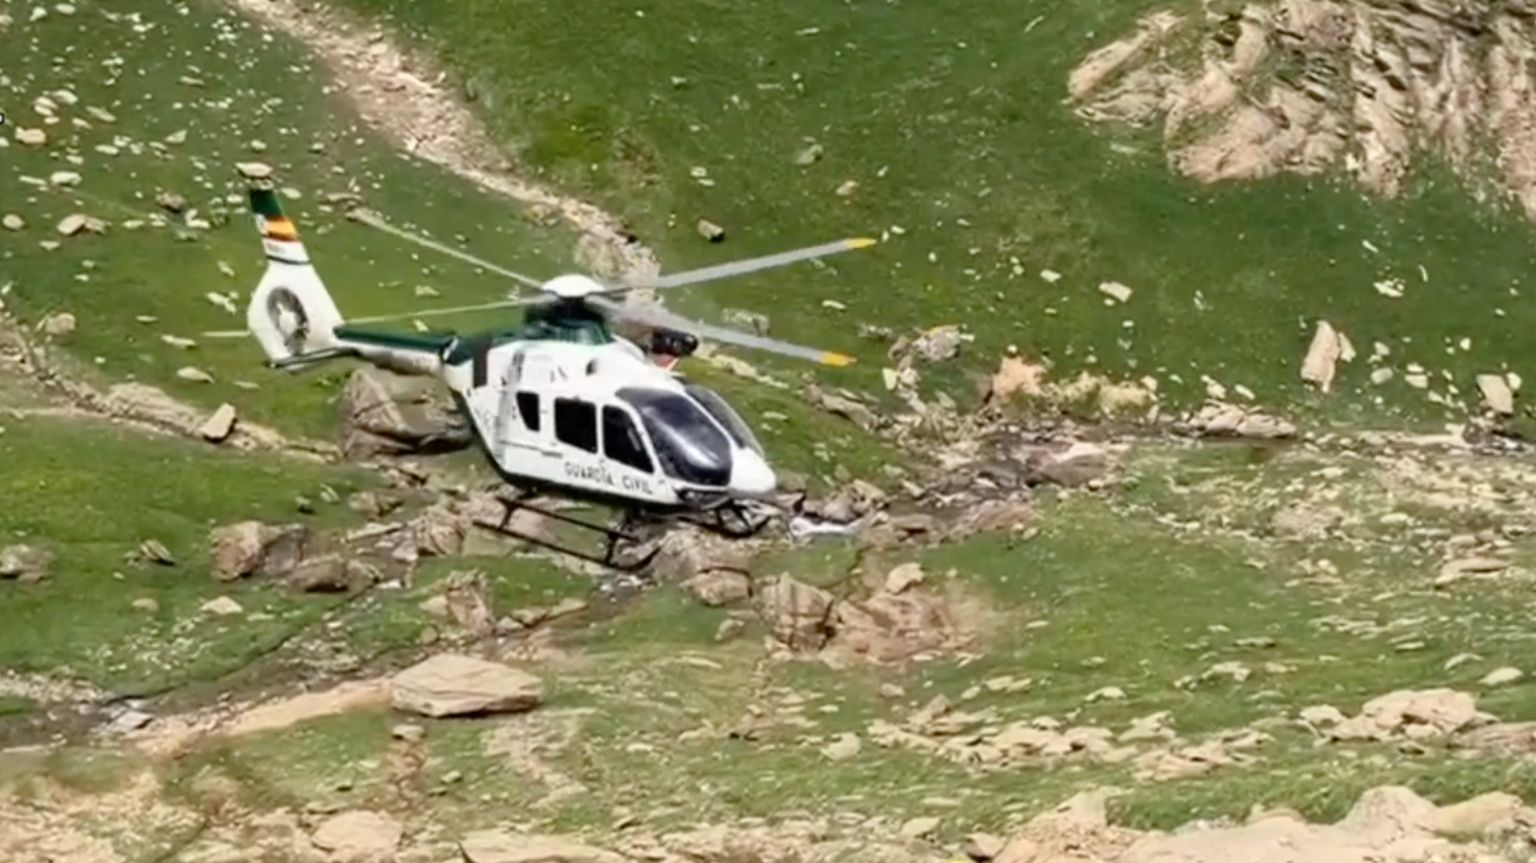 Light sandy coloured rocks on the grassy mountainous landscape of the Pyrenees with a white helicopter flying above the ground bearing the insignia Guardia Civil.